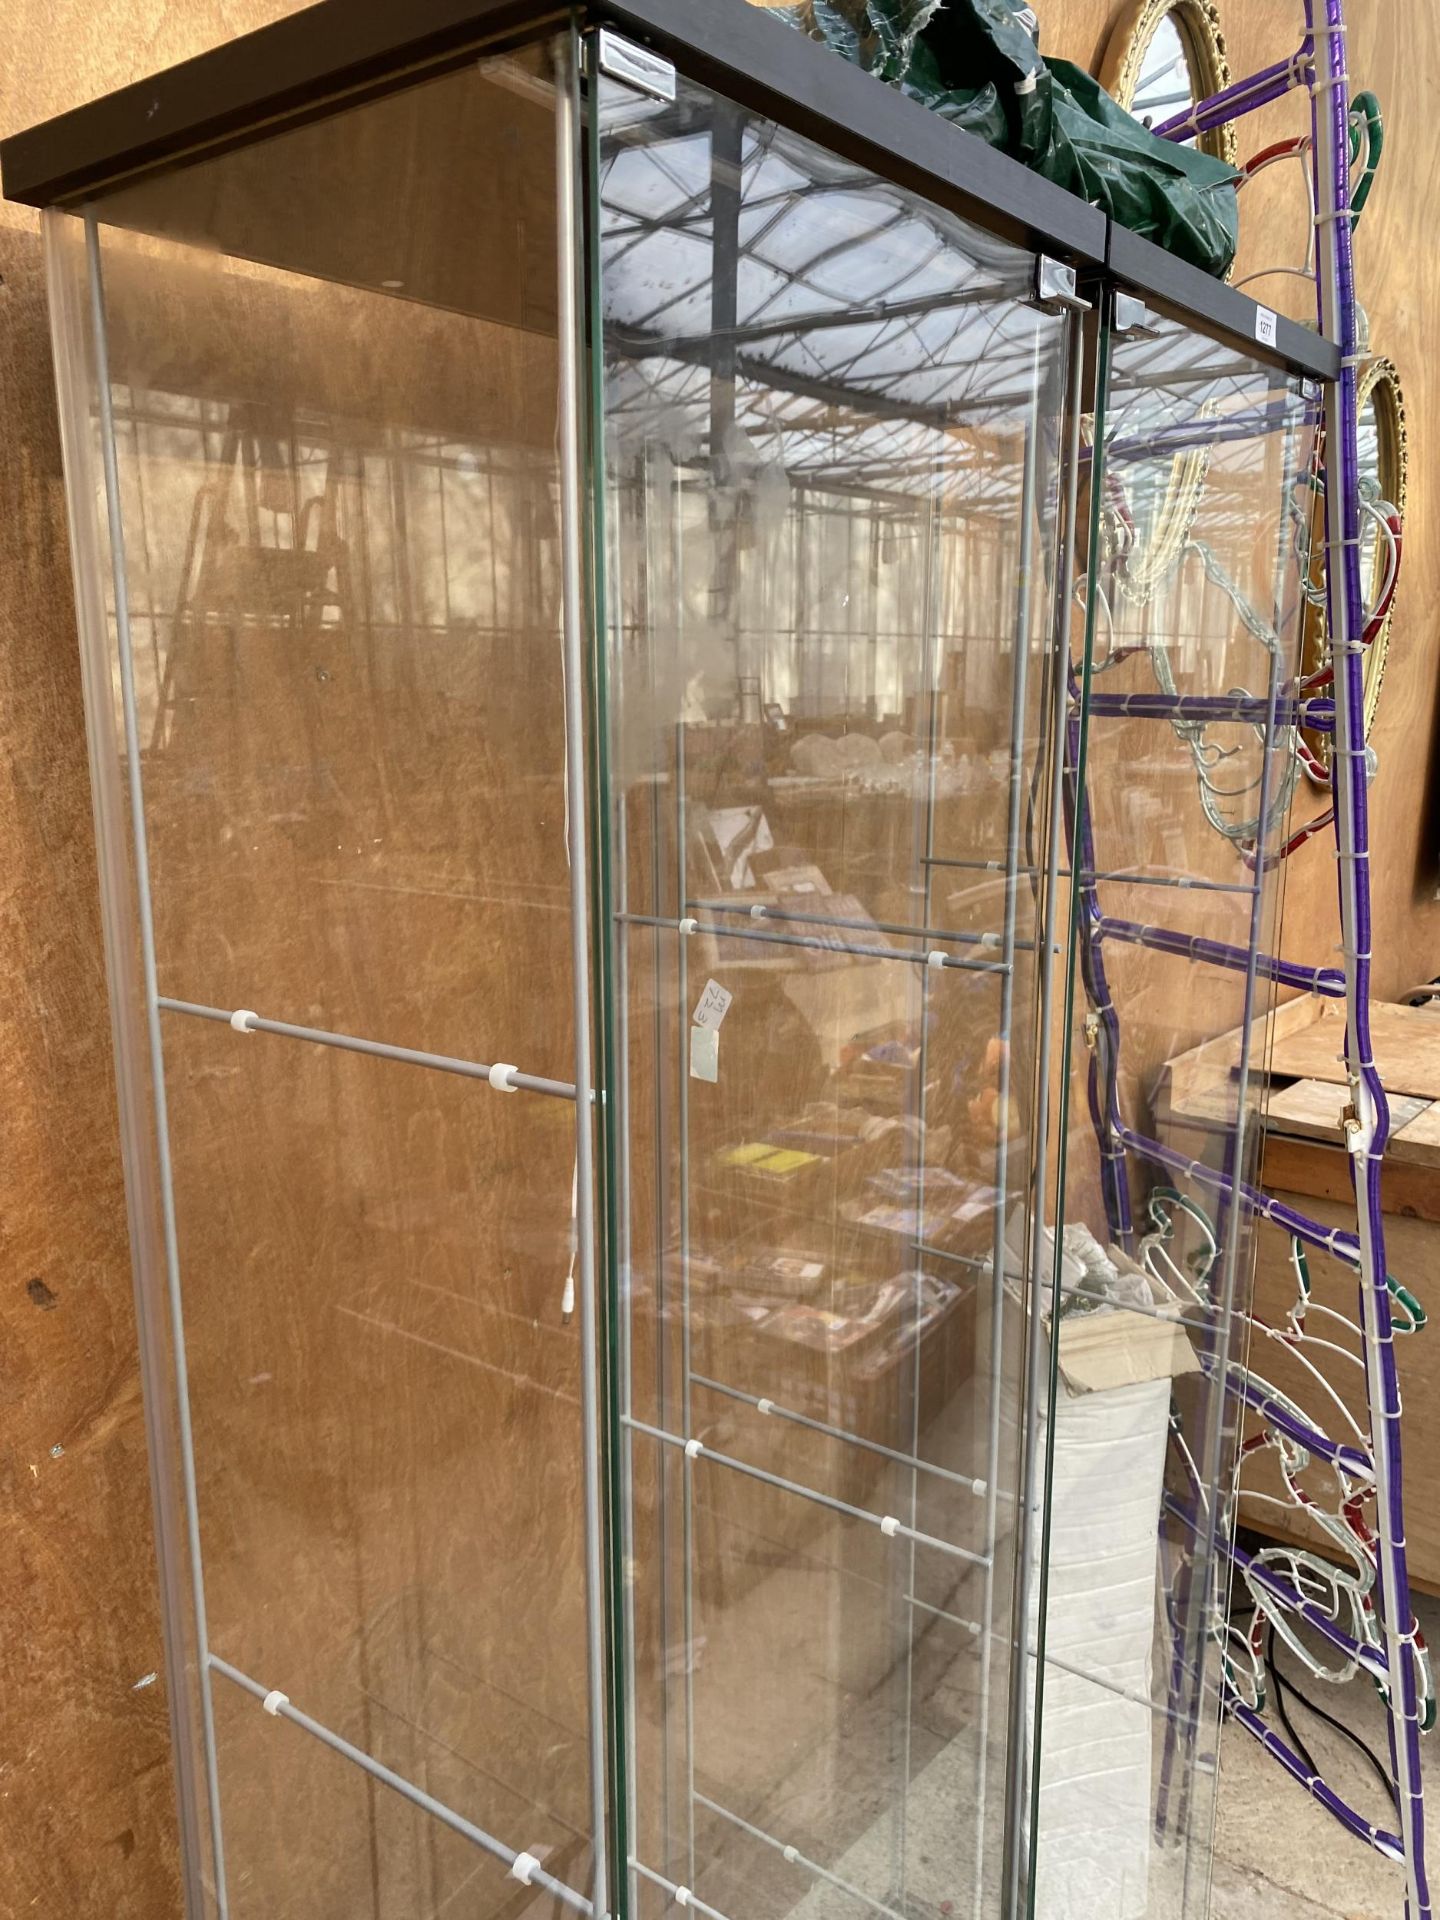 A PAIR OF GLASS DISPLAY CABINETS COMPLETE WITH THREE GLASS SHELVES EACH - Image 2 of 5